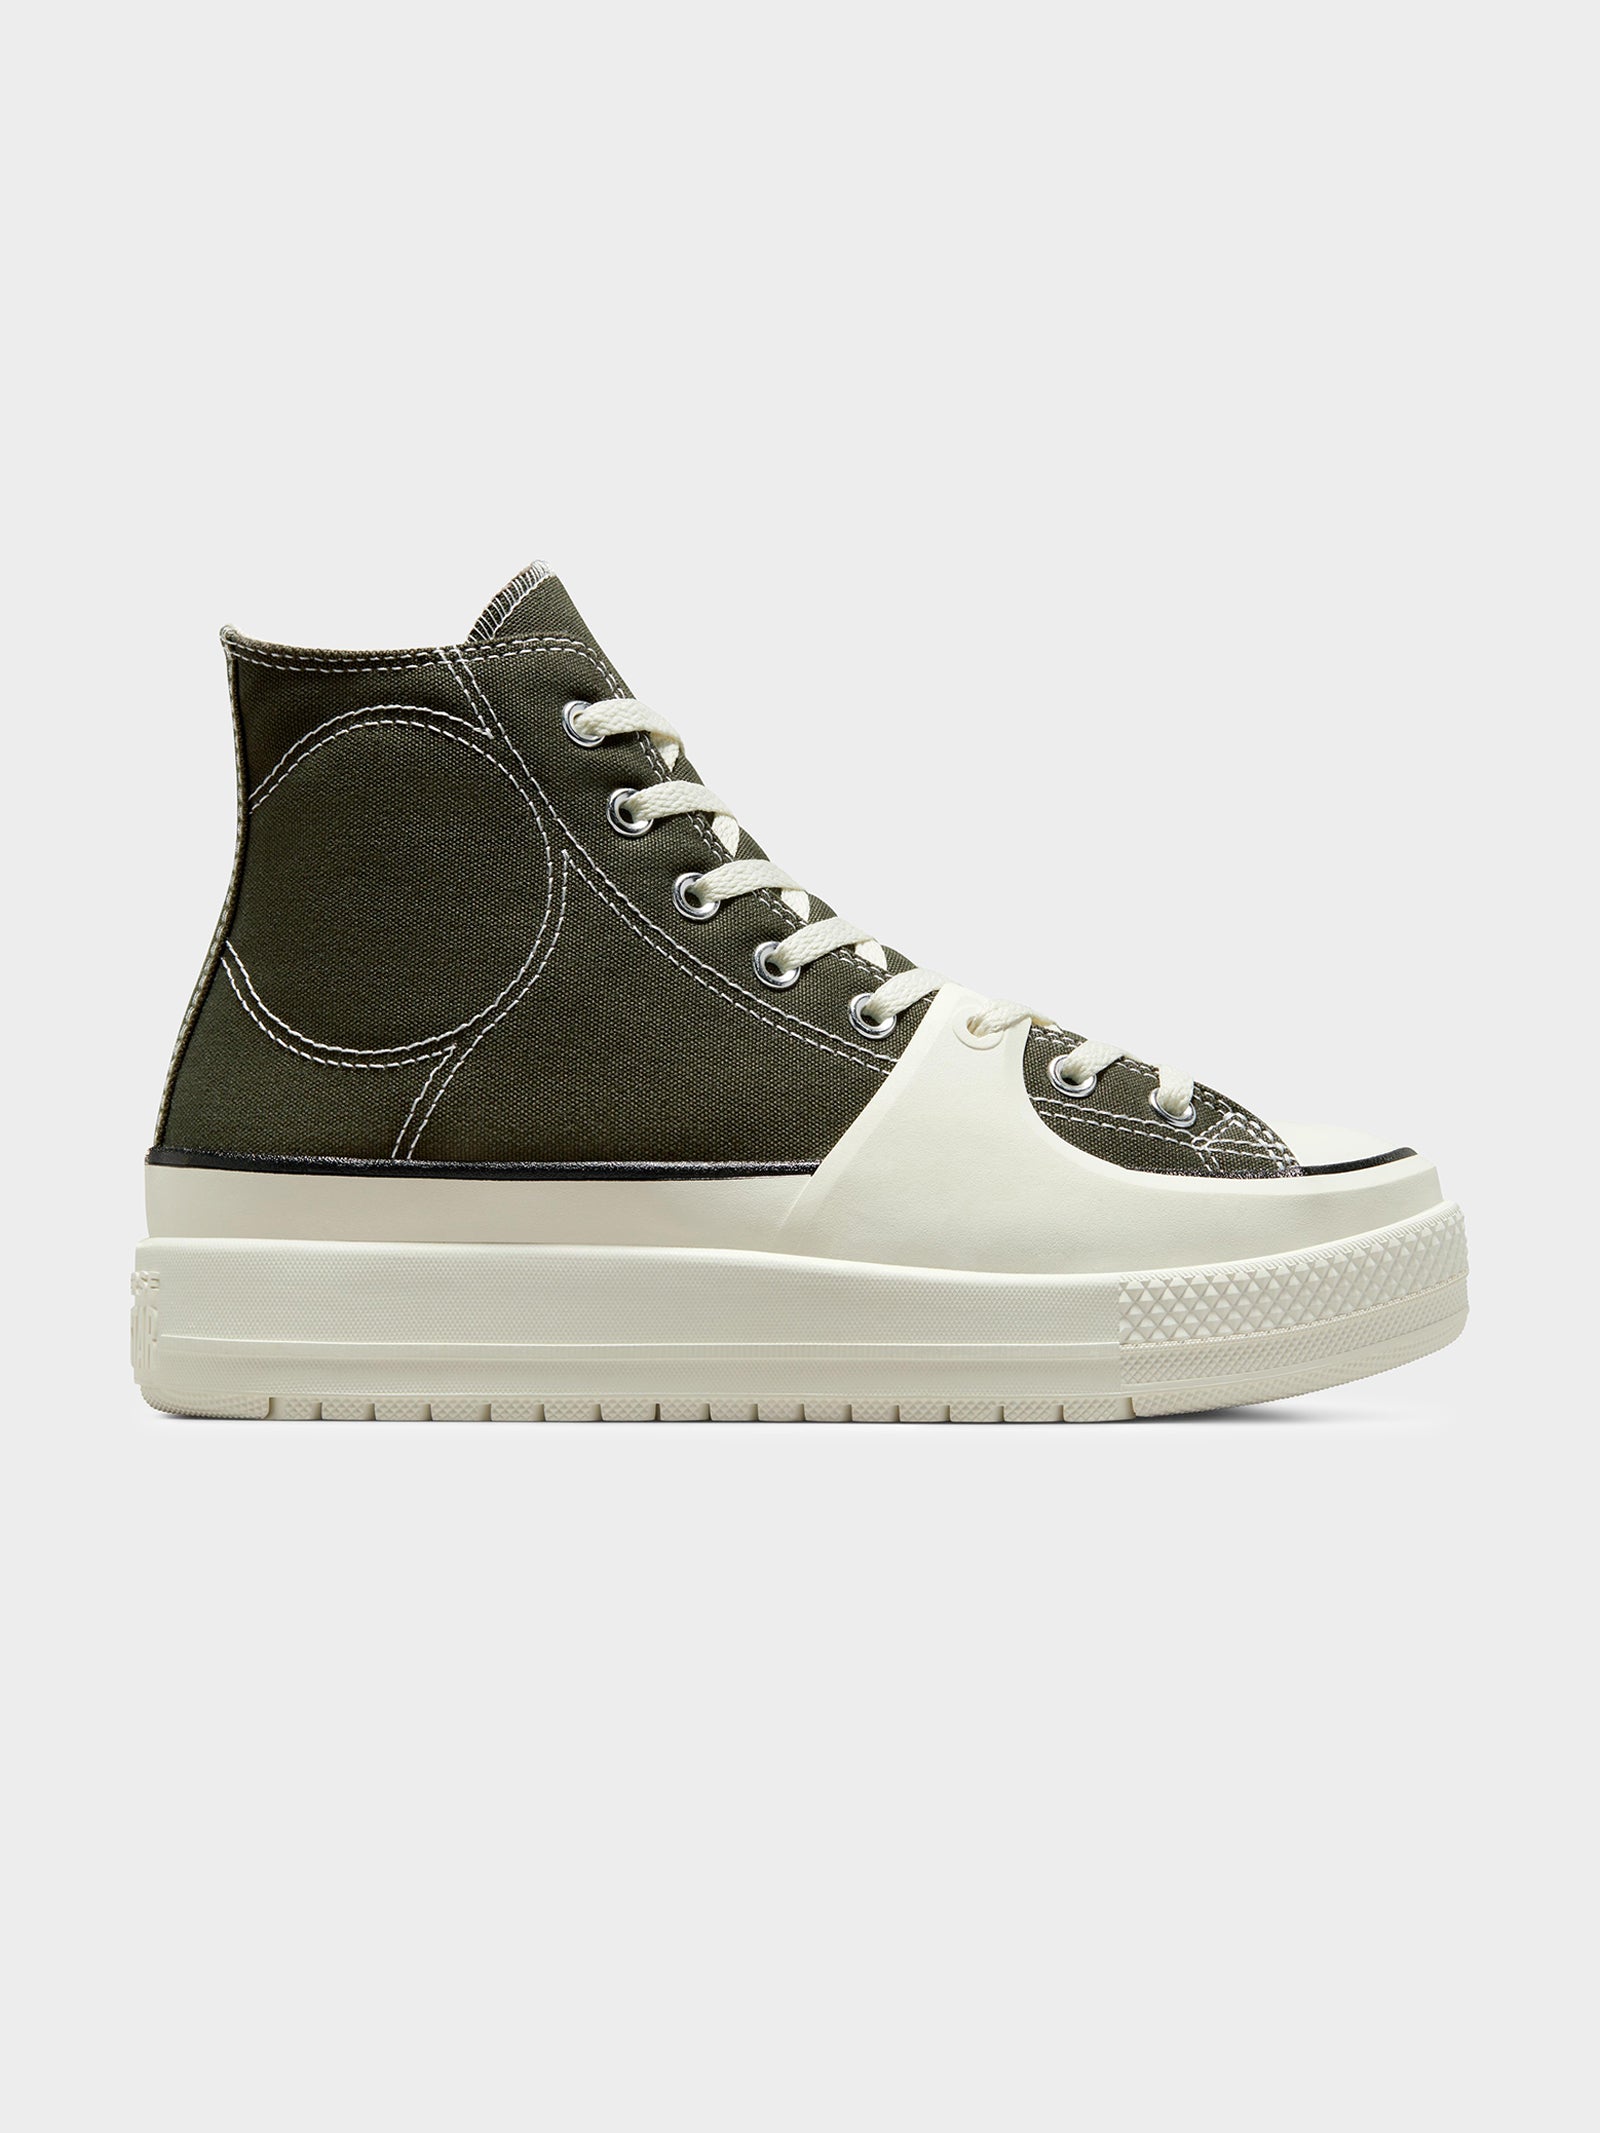 Unisex Chuck Taylor All Star Construct Deco Stitch High Top Sneakers in Cave Green